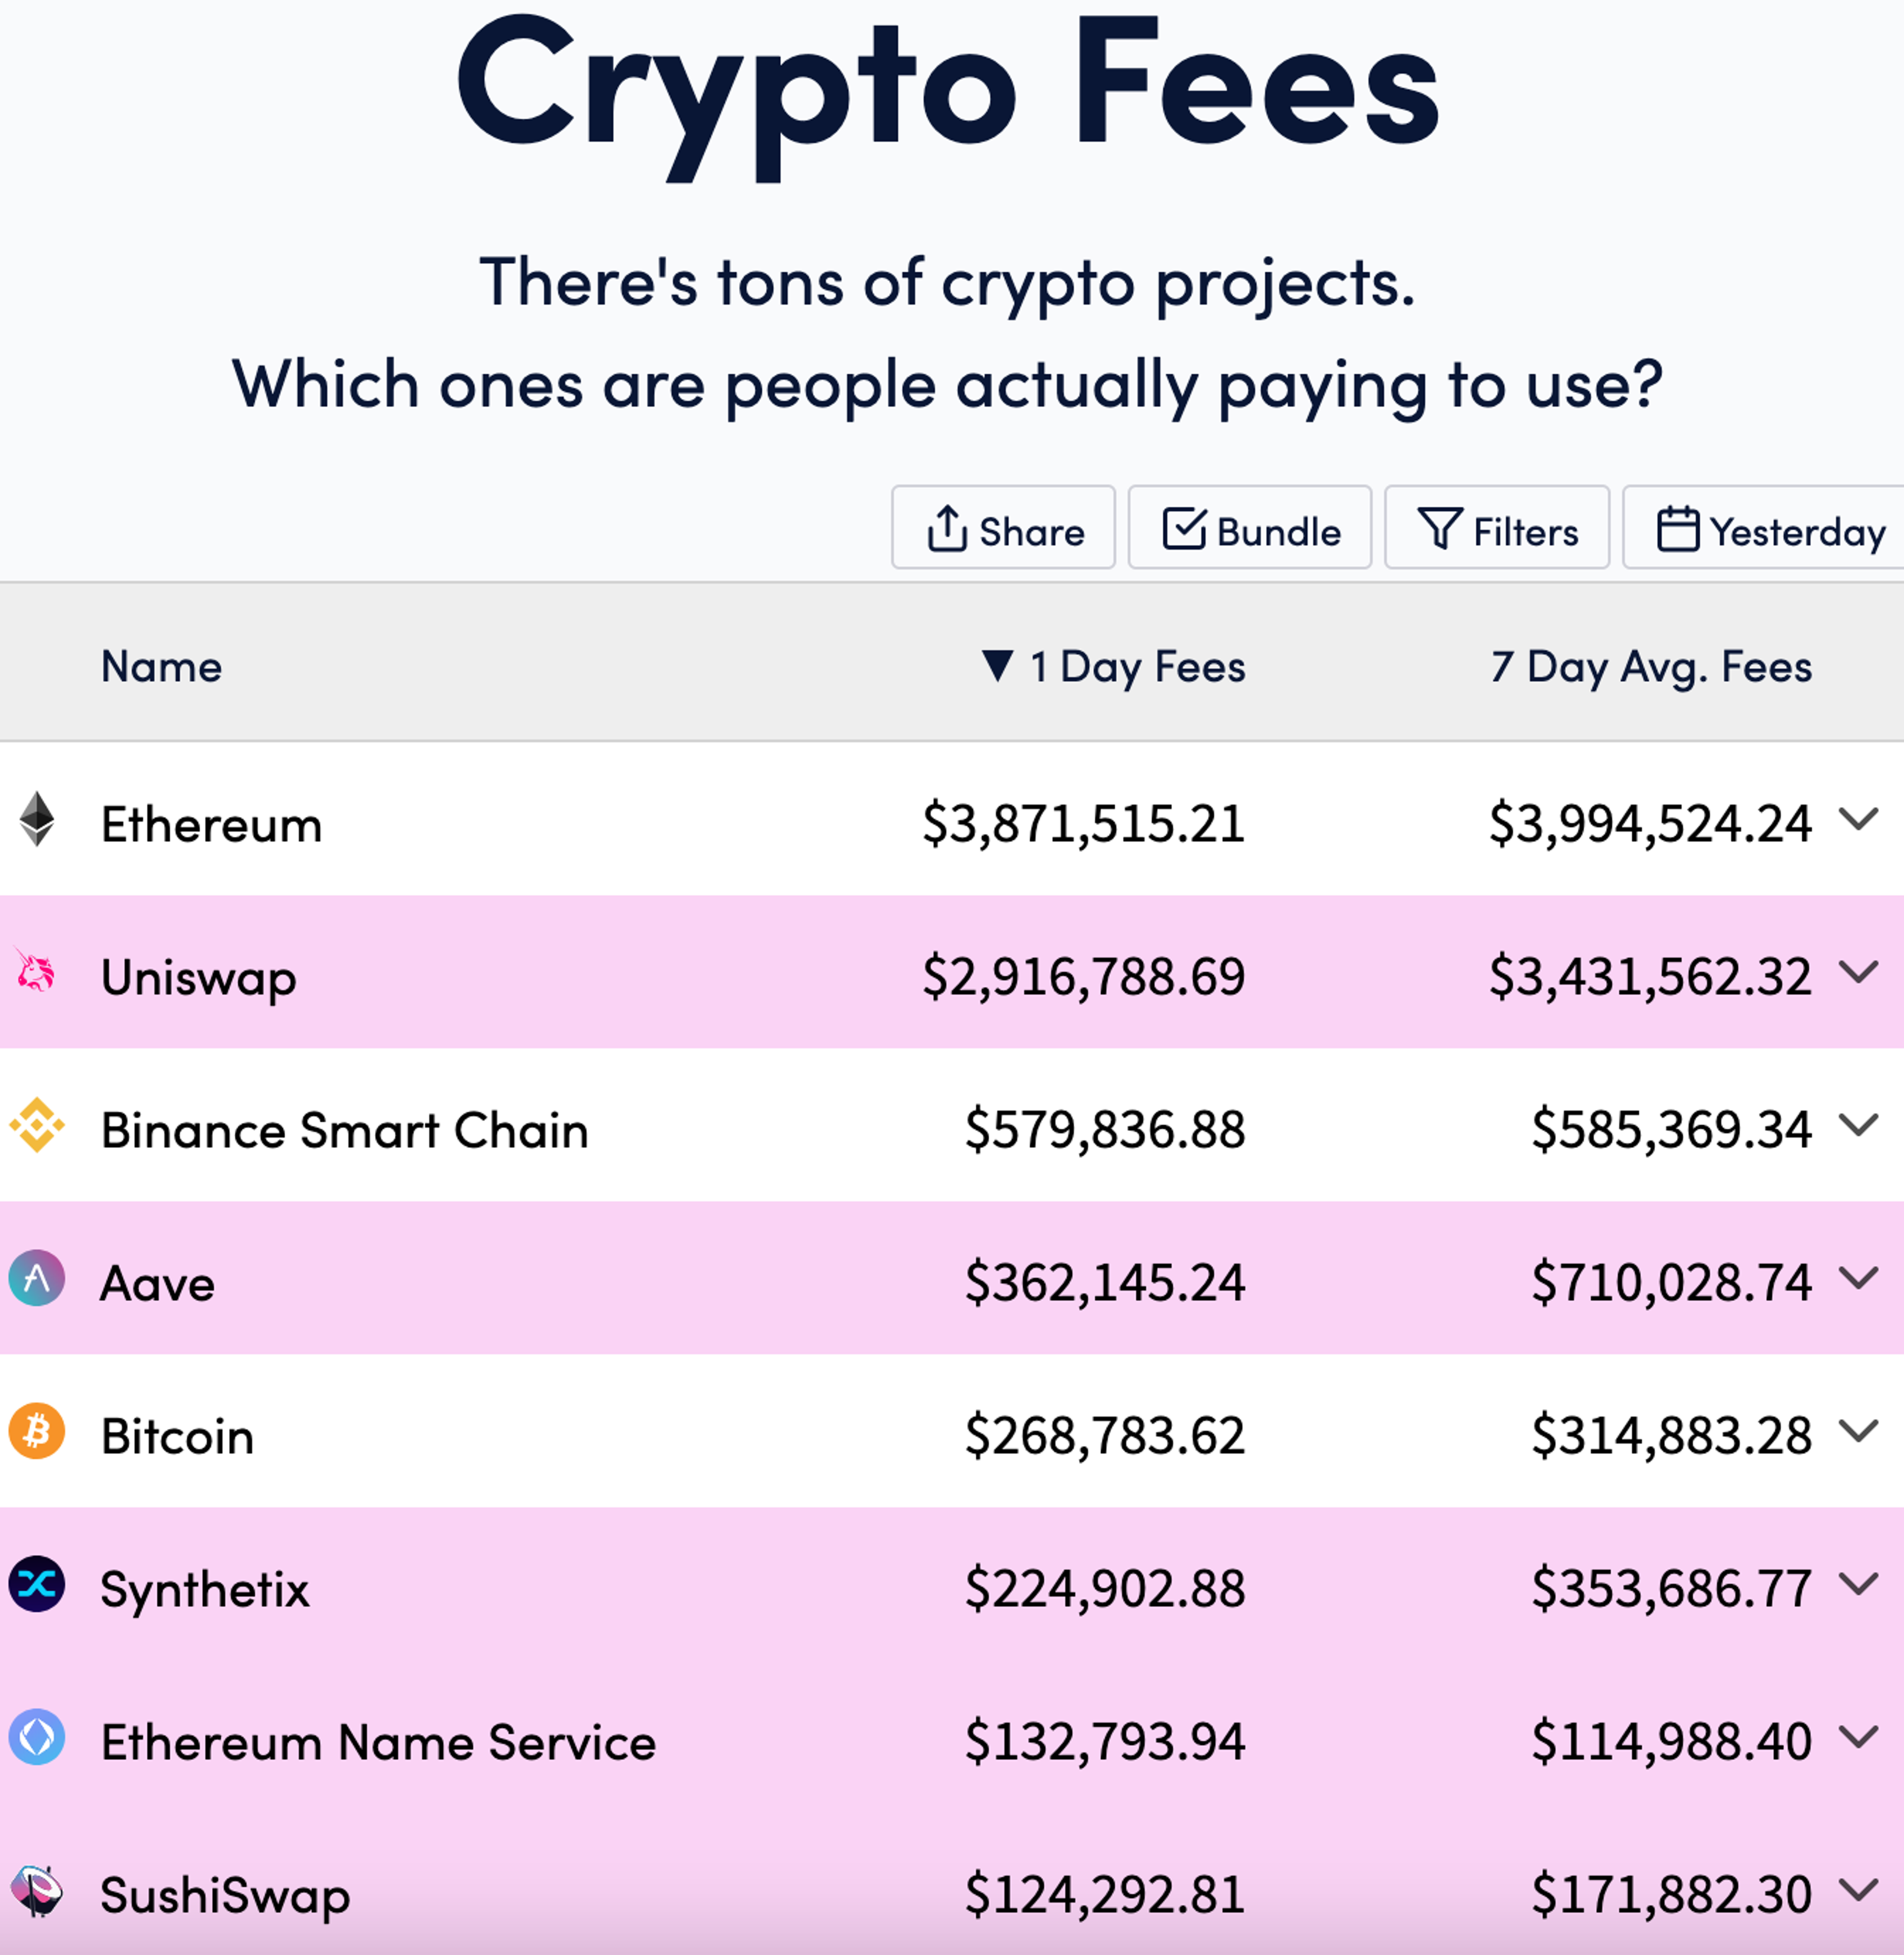 Table of Fees on different platforms